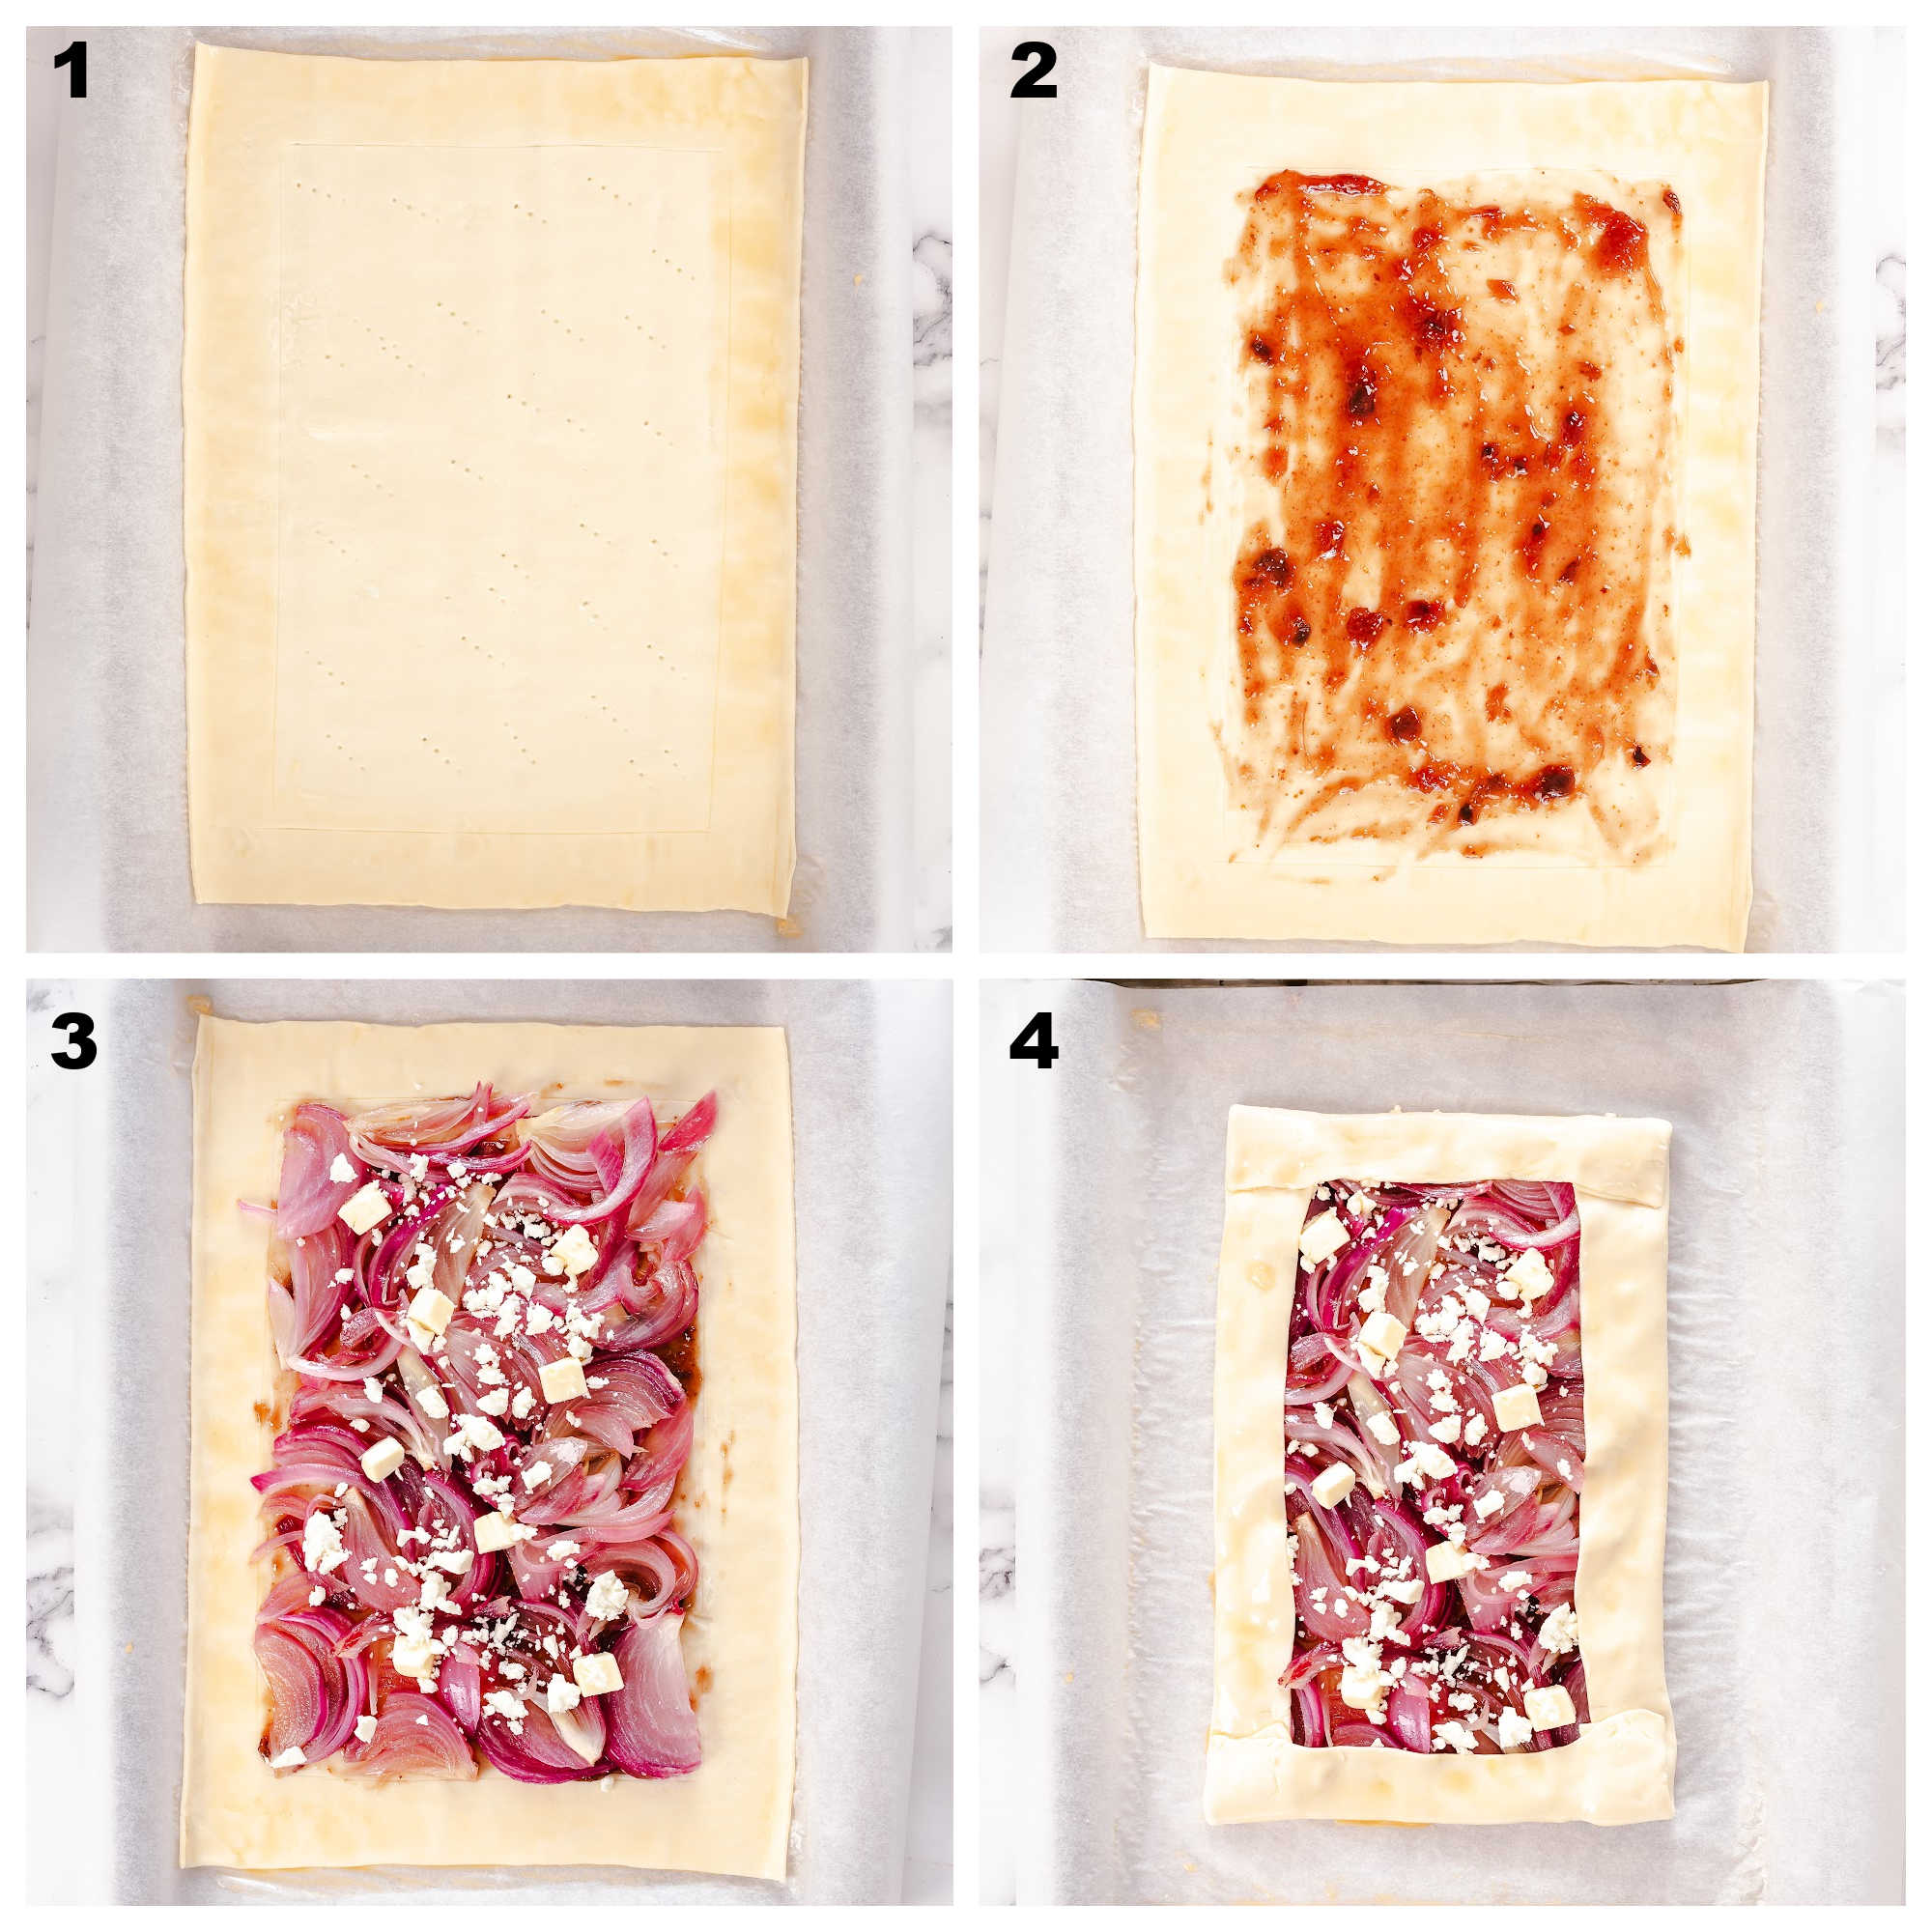 Collage of the process for making a puff pastry red onion tart